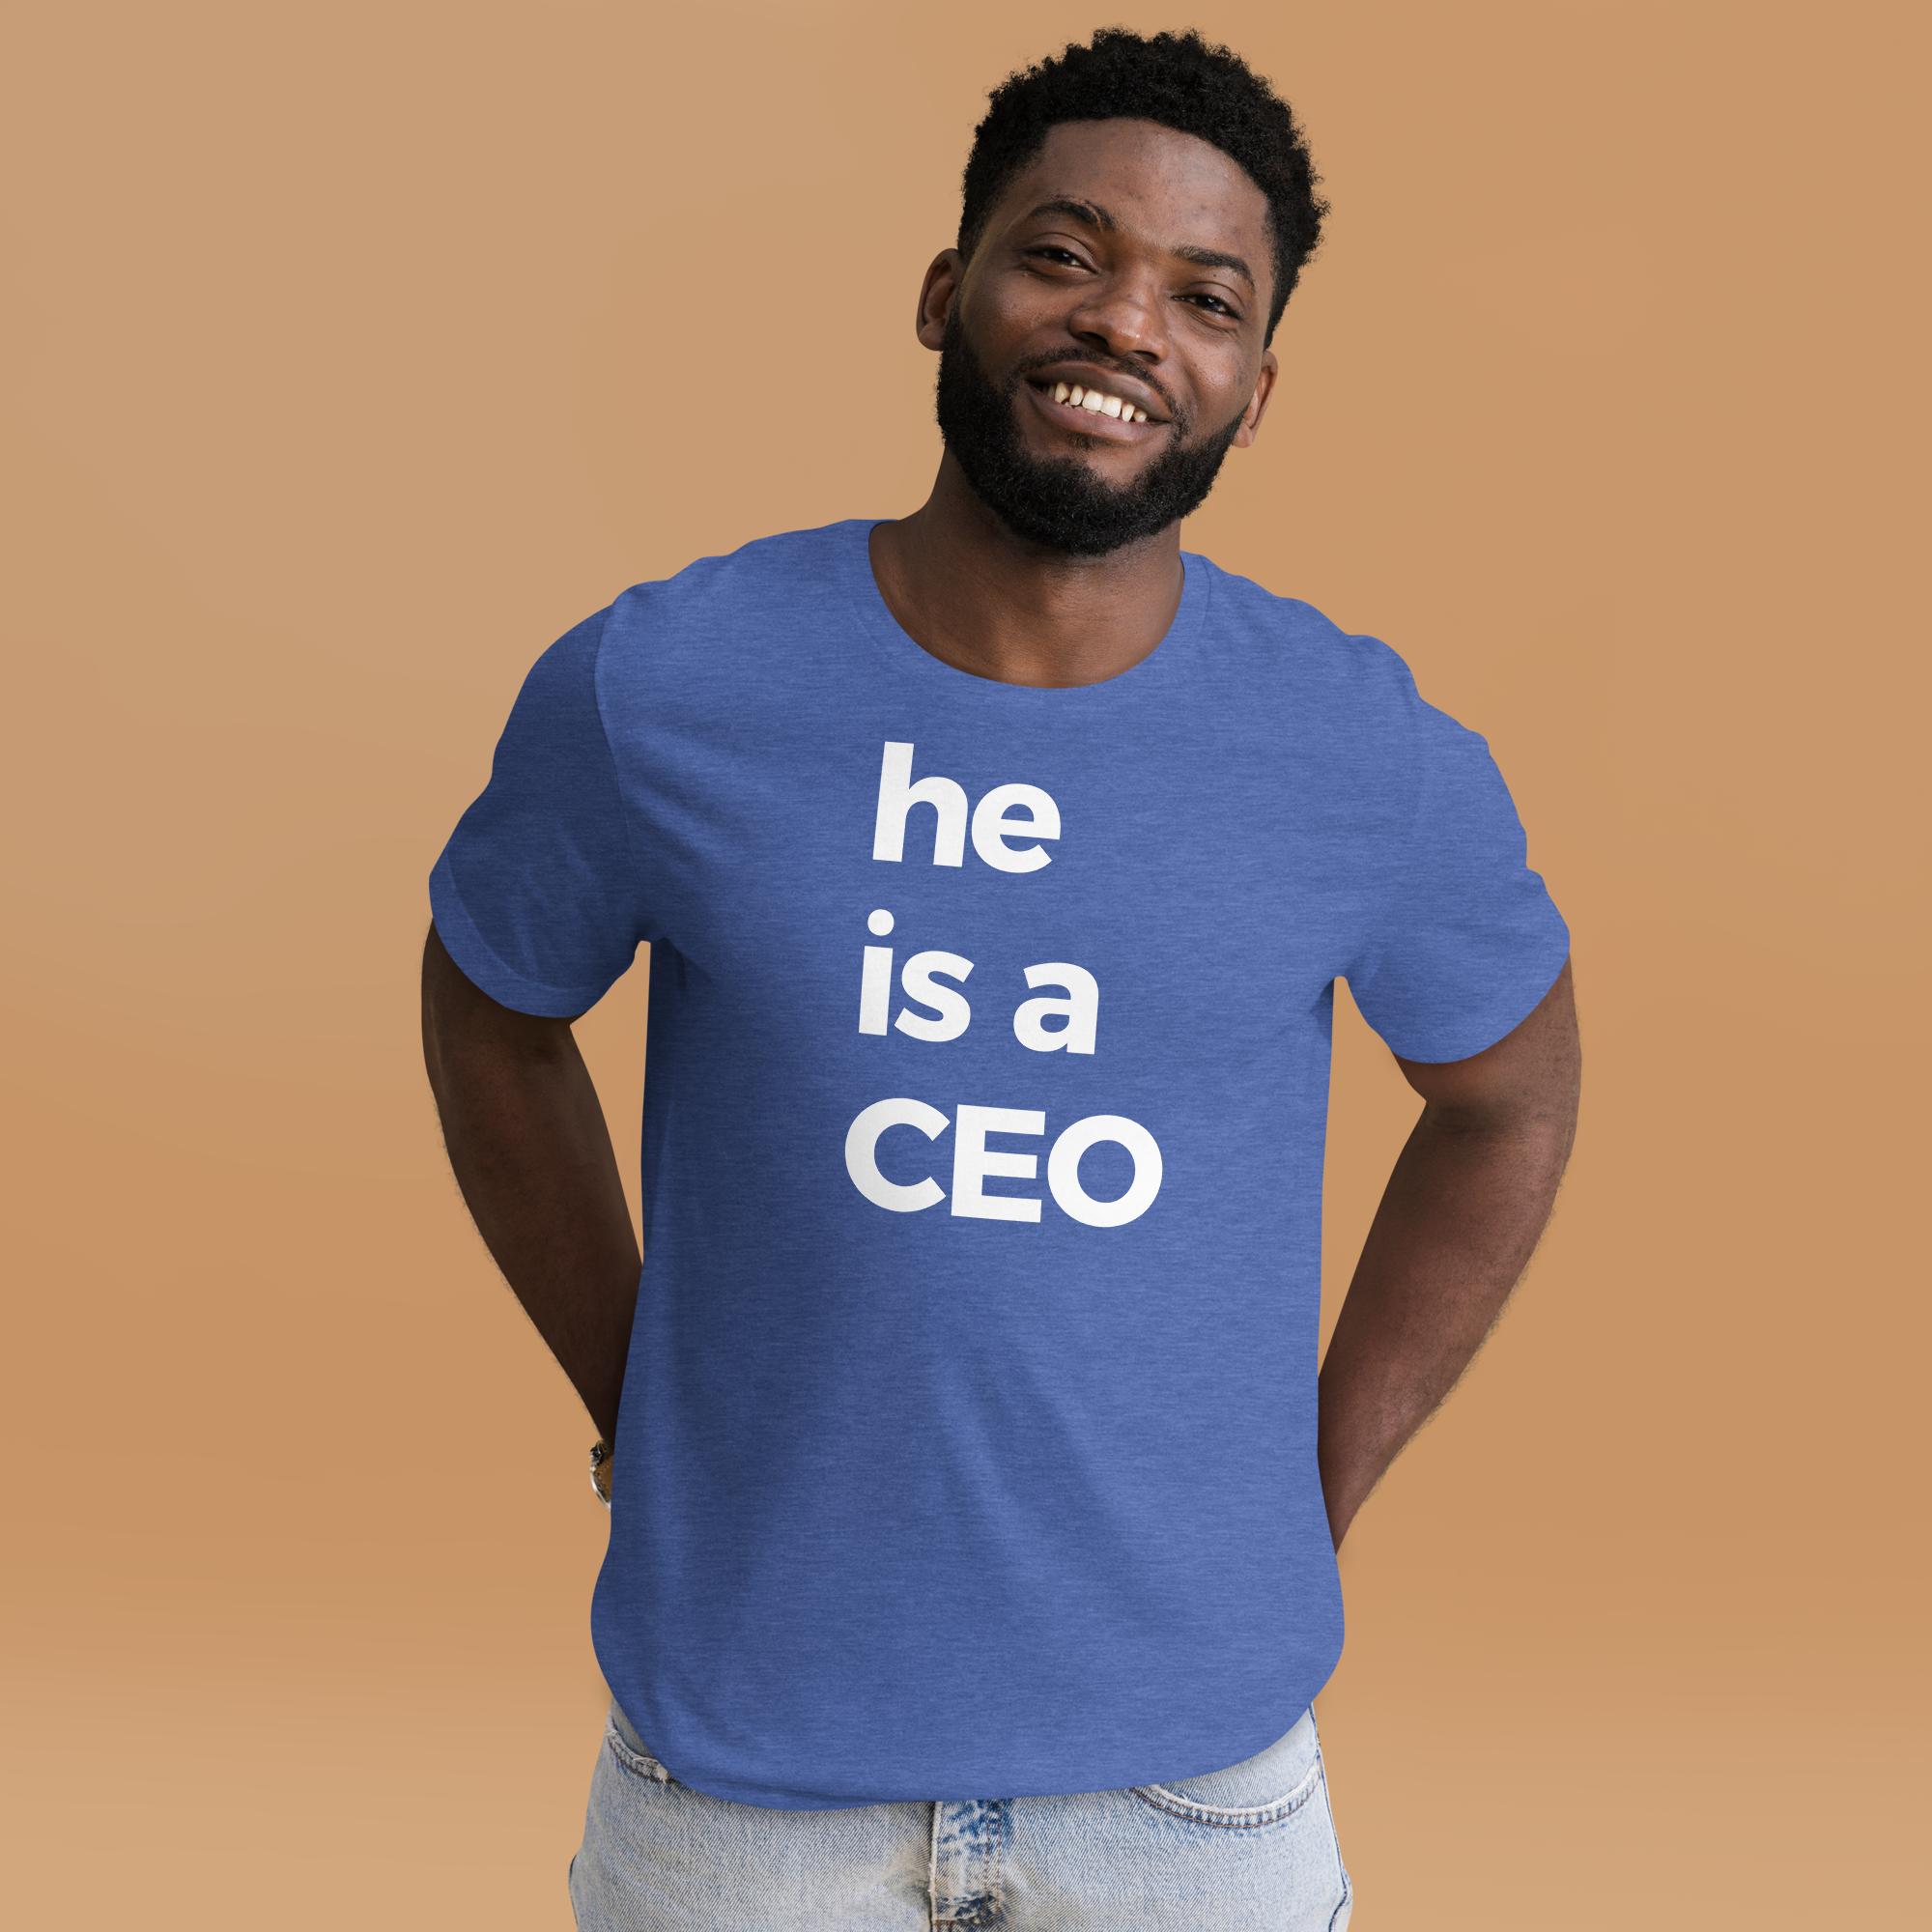 he is a ceo tee